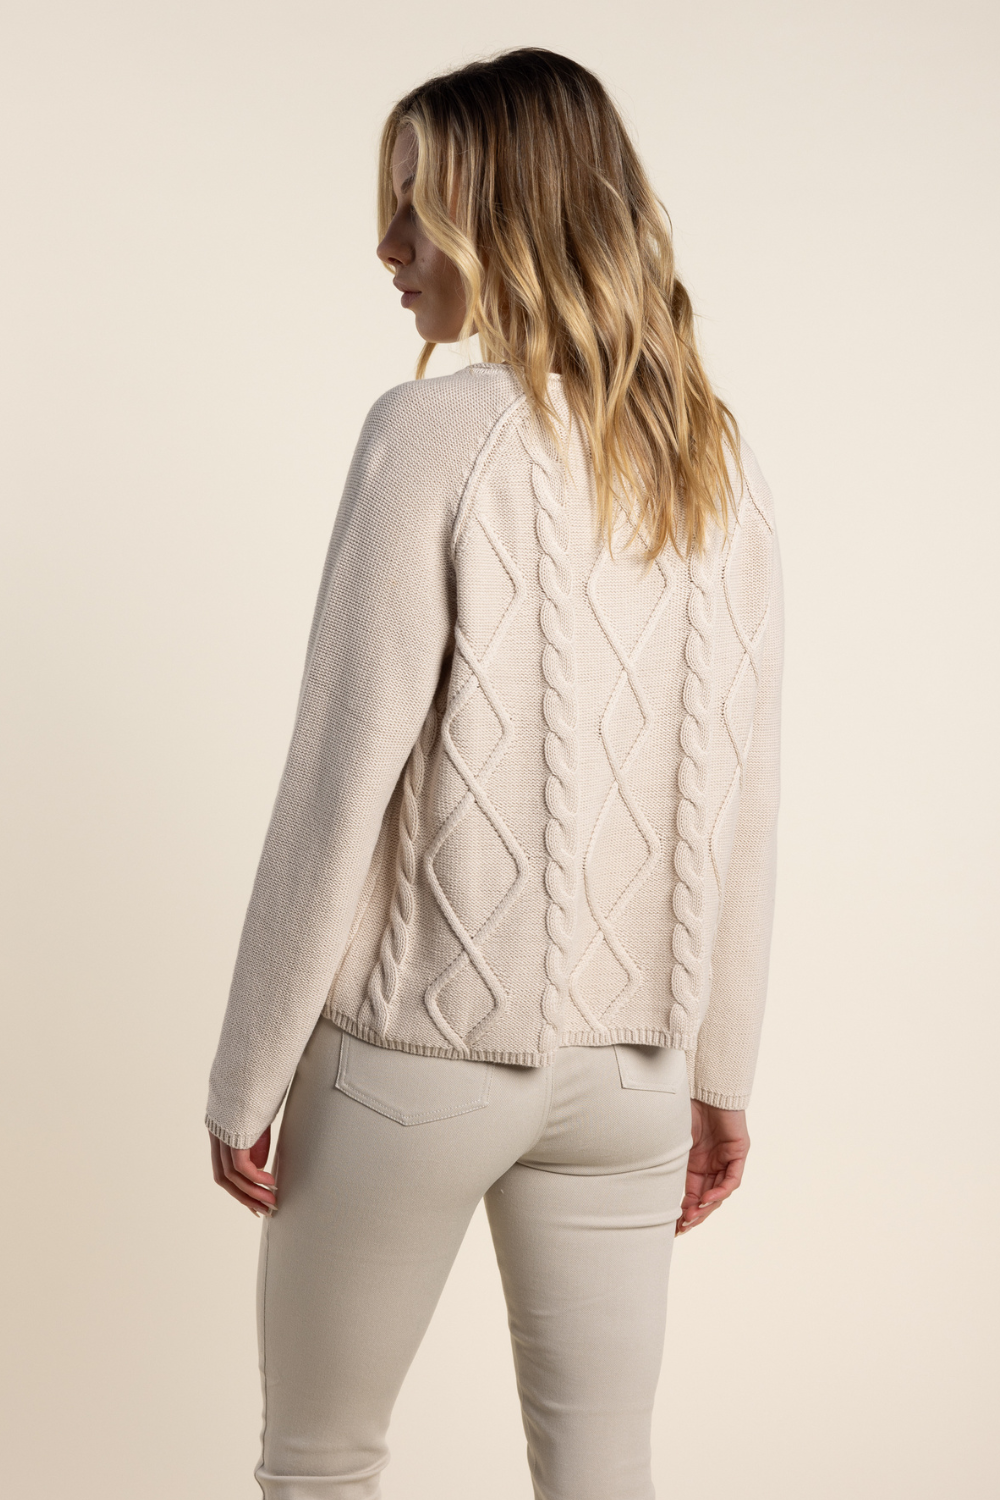 Two T's Cable Sweater Front & Back Natural